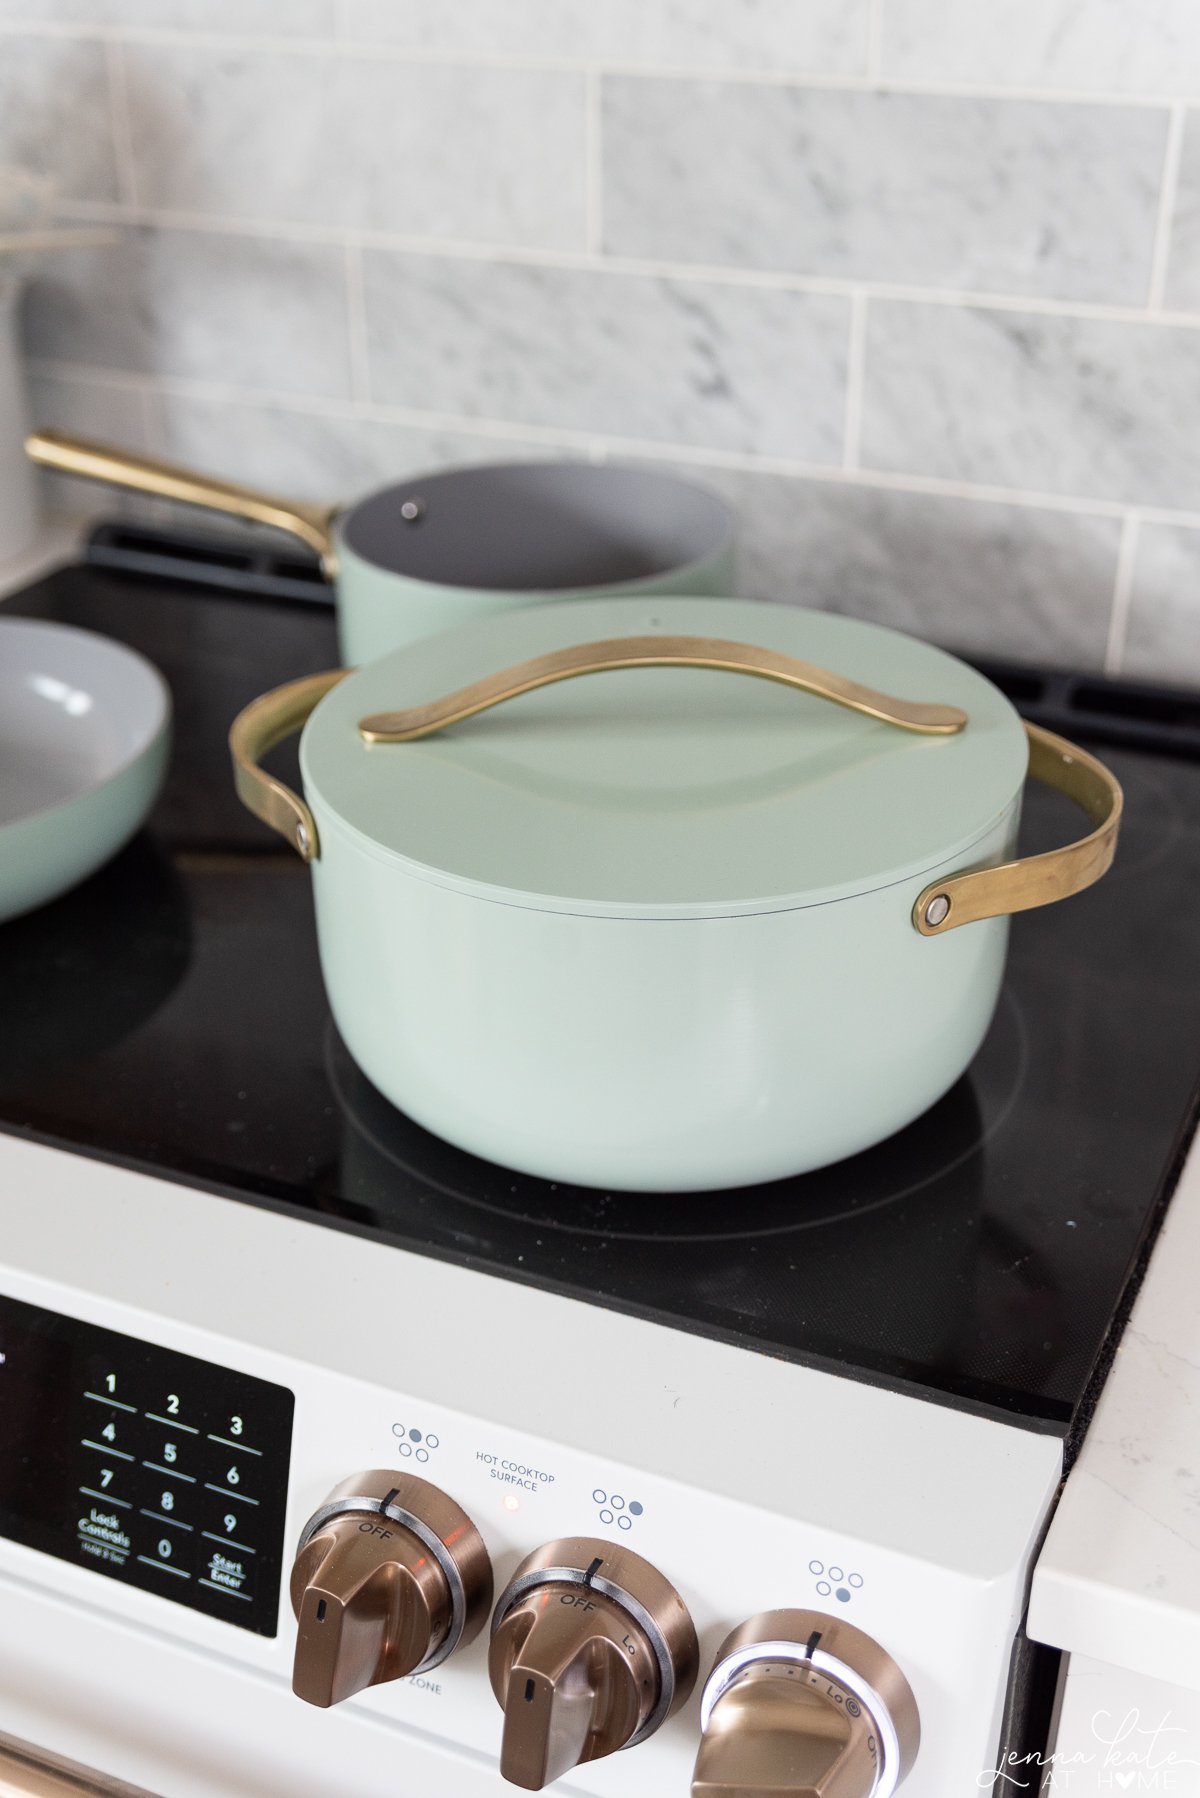 mint green Caraway dutch oven on a stovetop